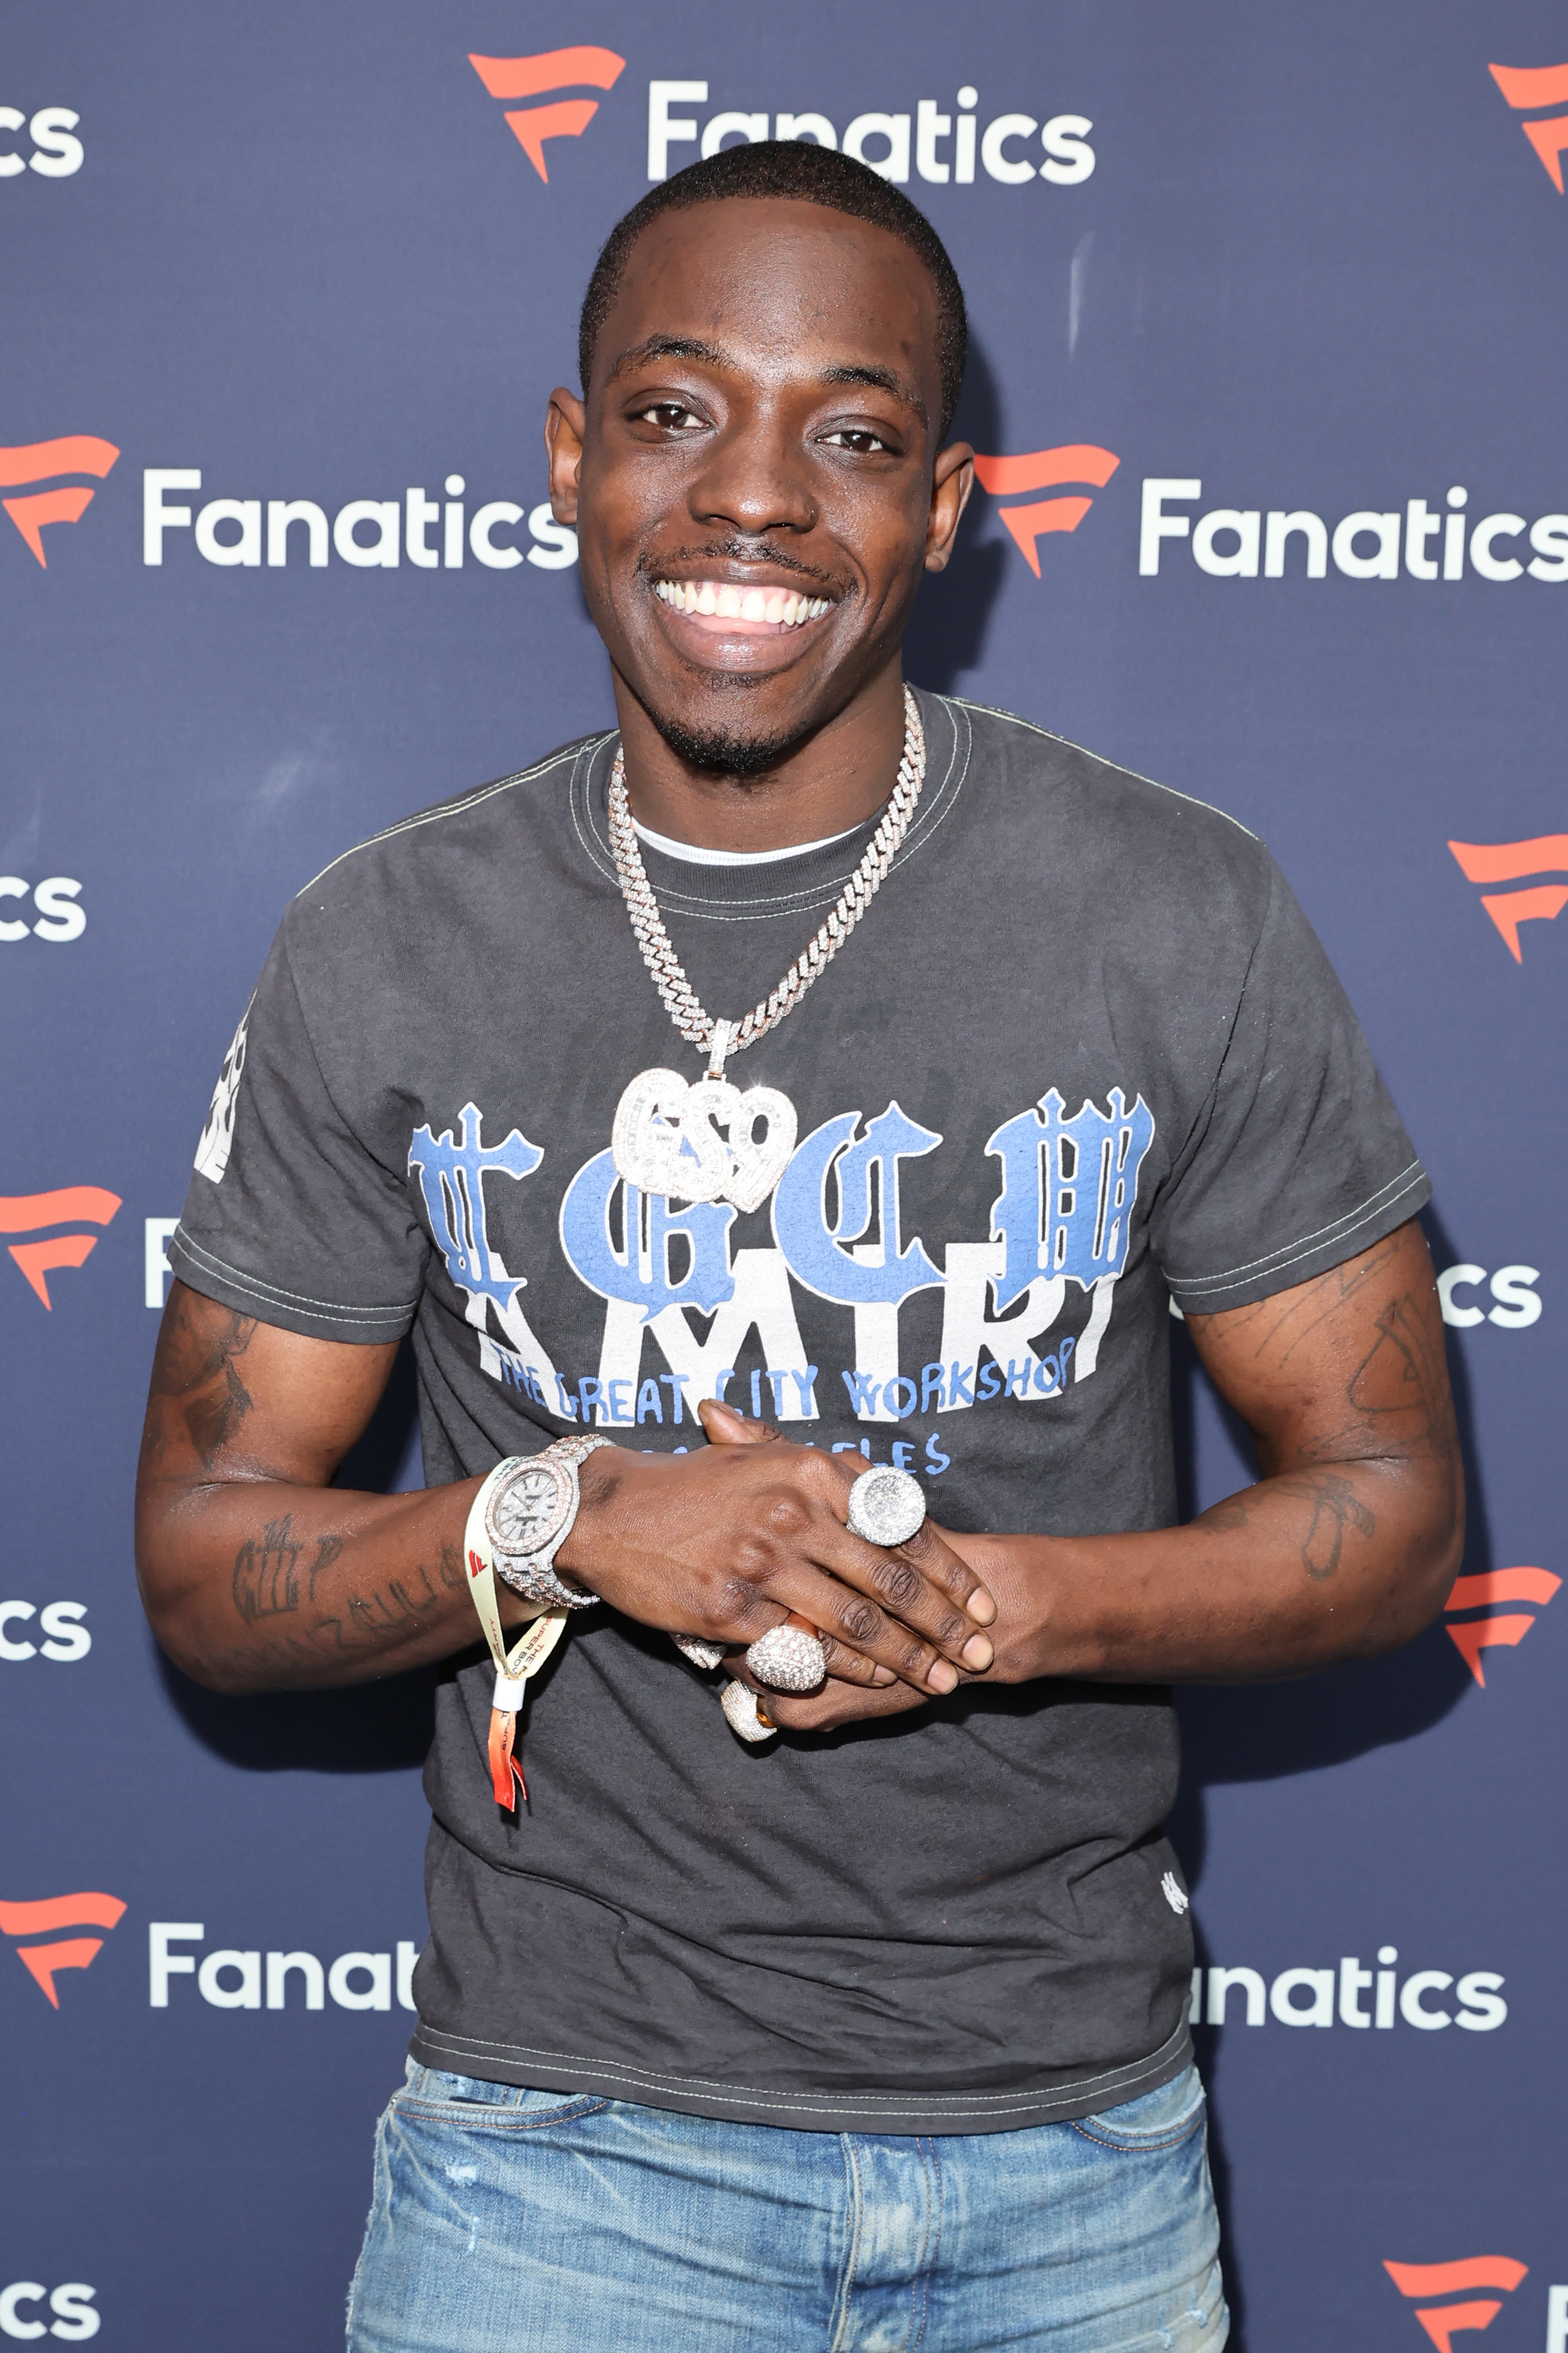 Bobby Shmurda at the Fanatics Super Bowl Party on February 12, 2022, in Culver City, California. | Source: Getty Images